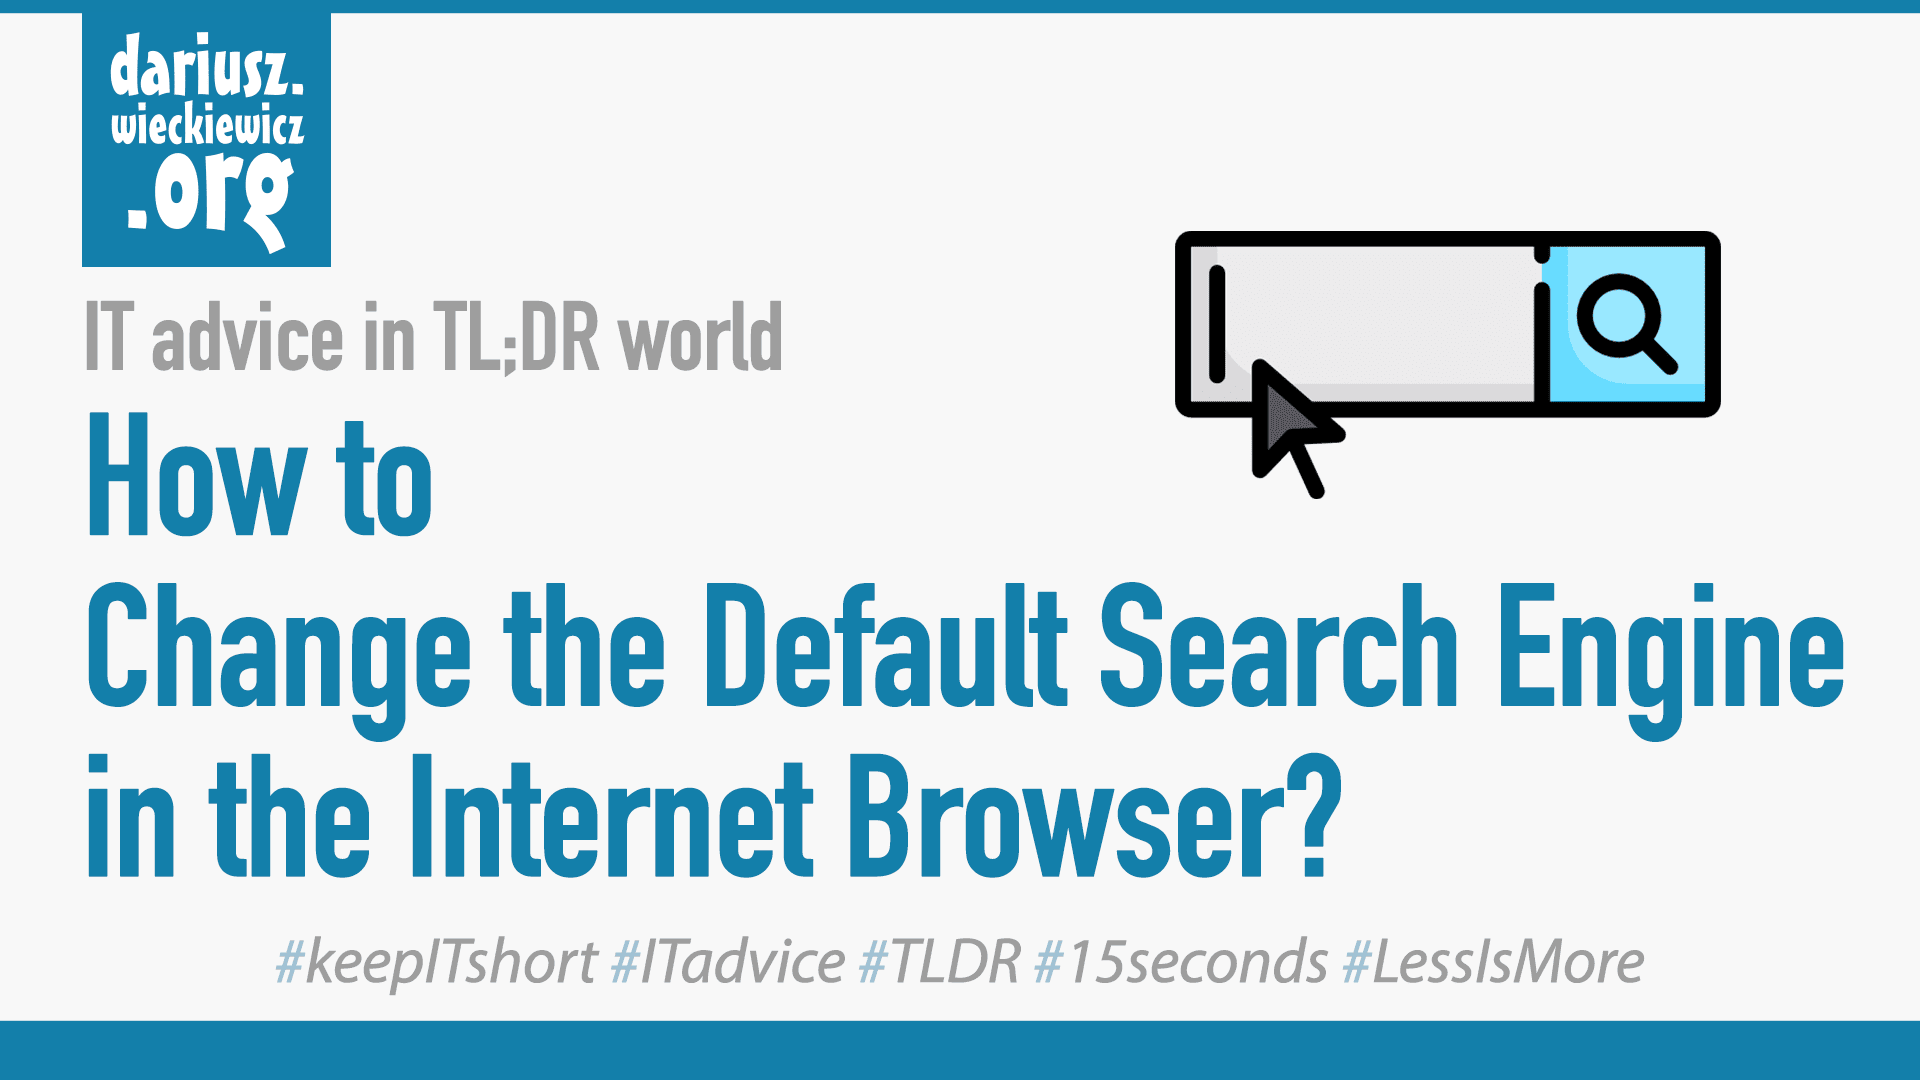 How to Change the Default Search Engine in the Internet Browser?